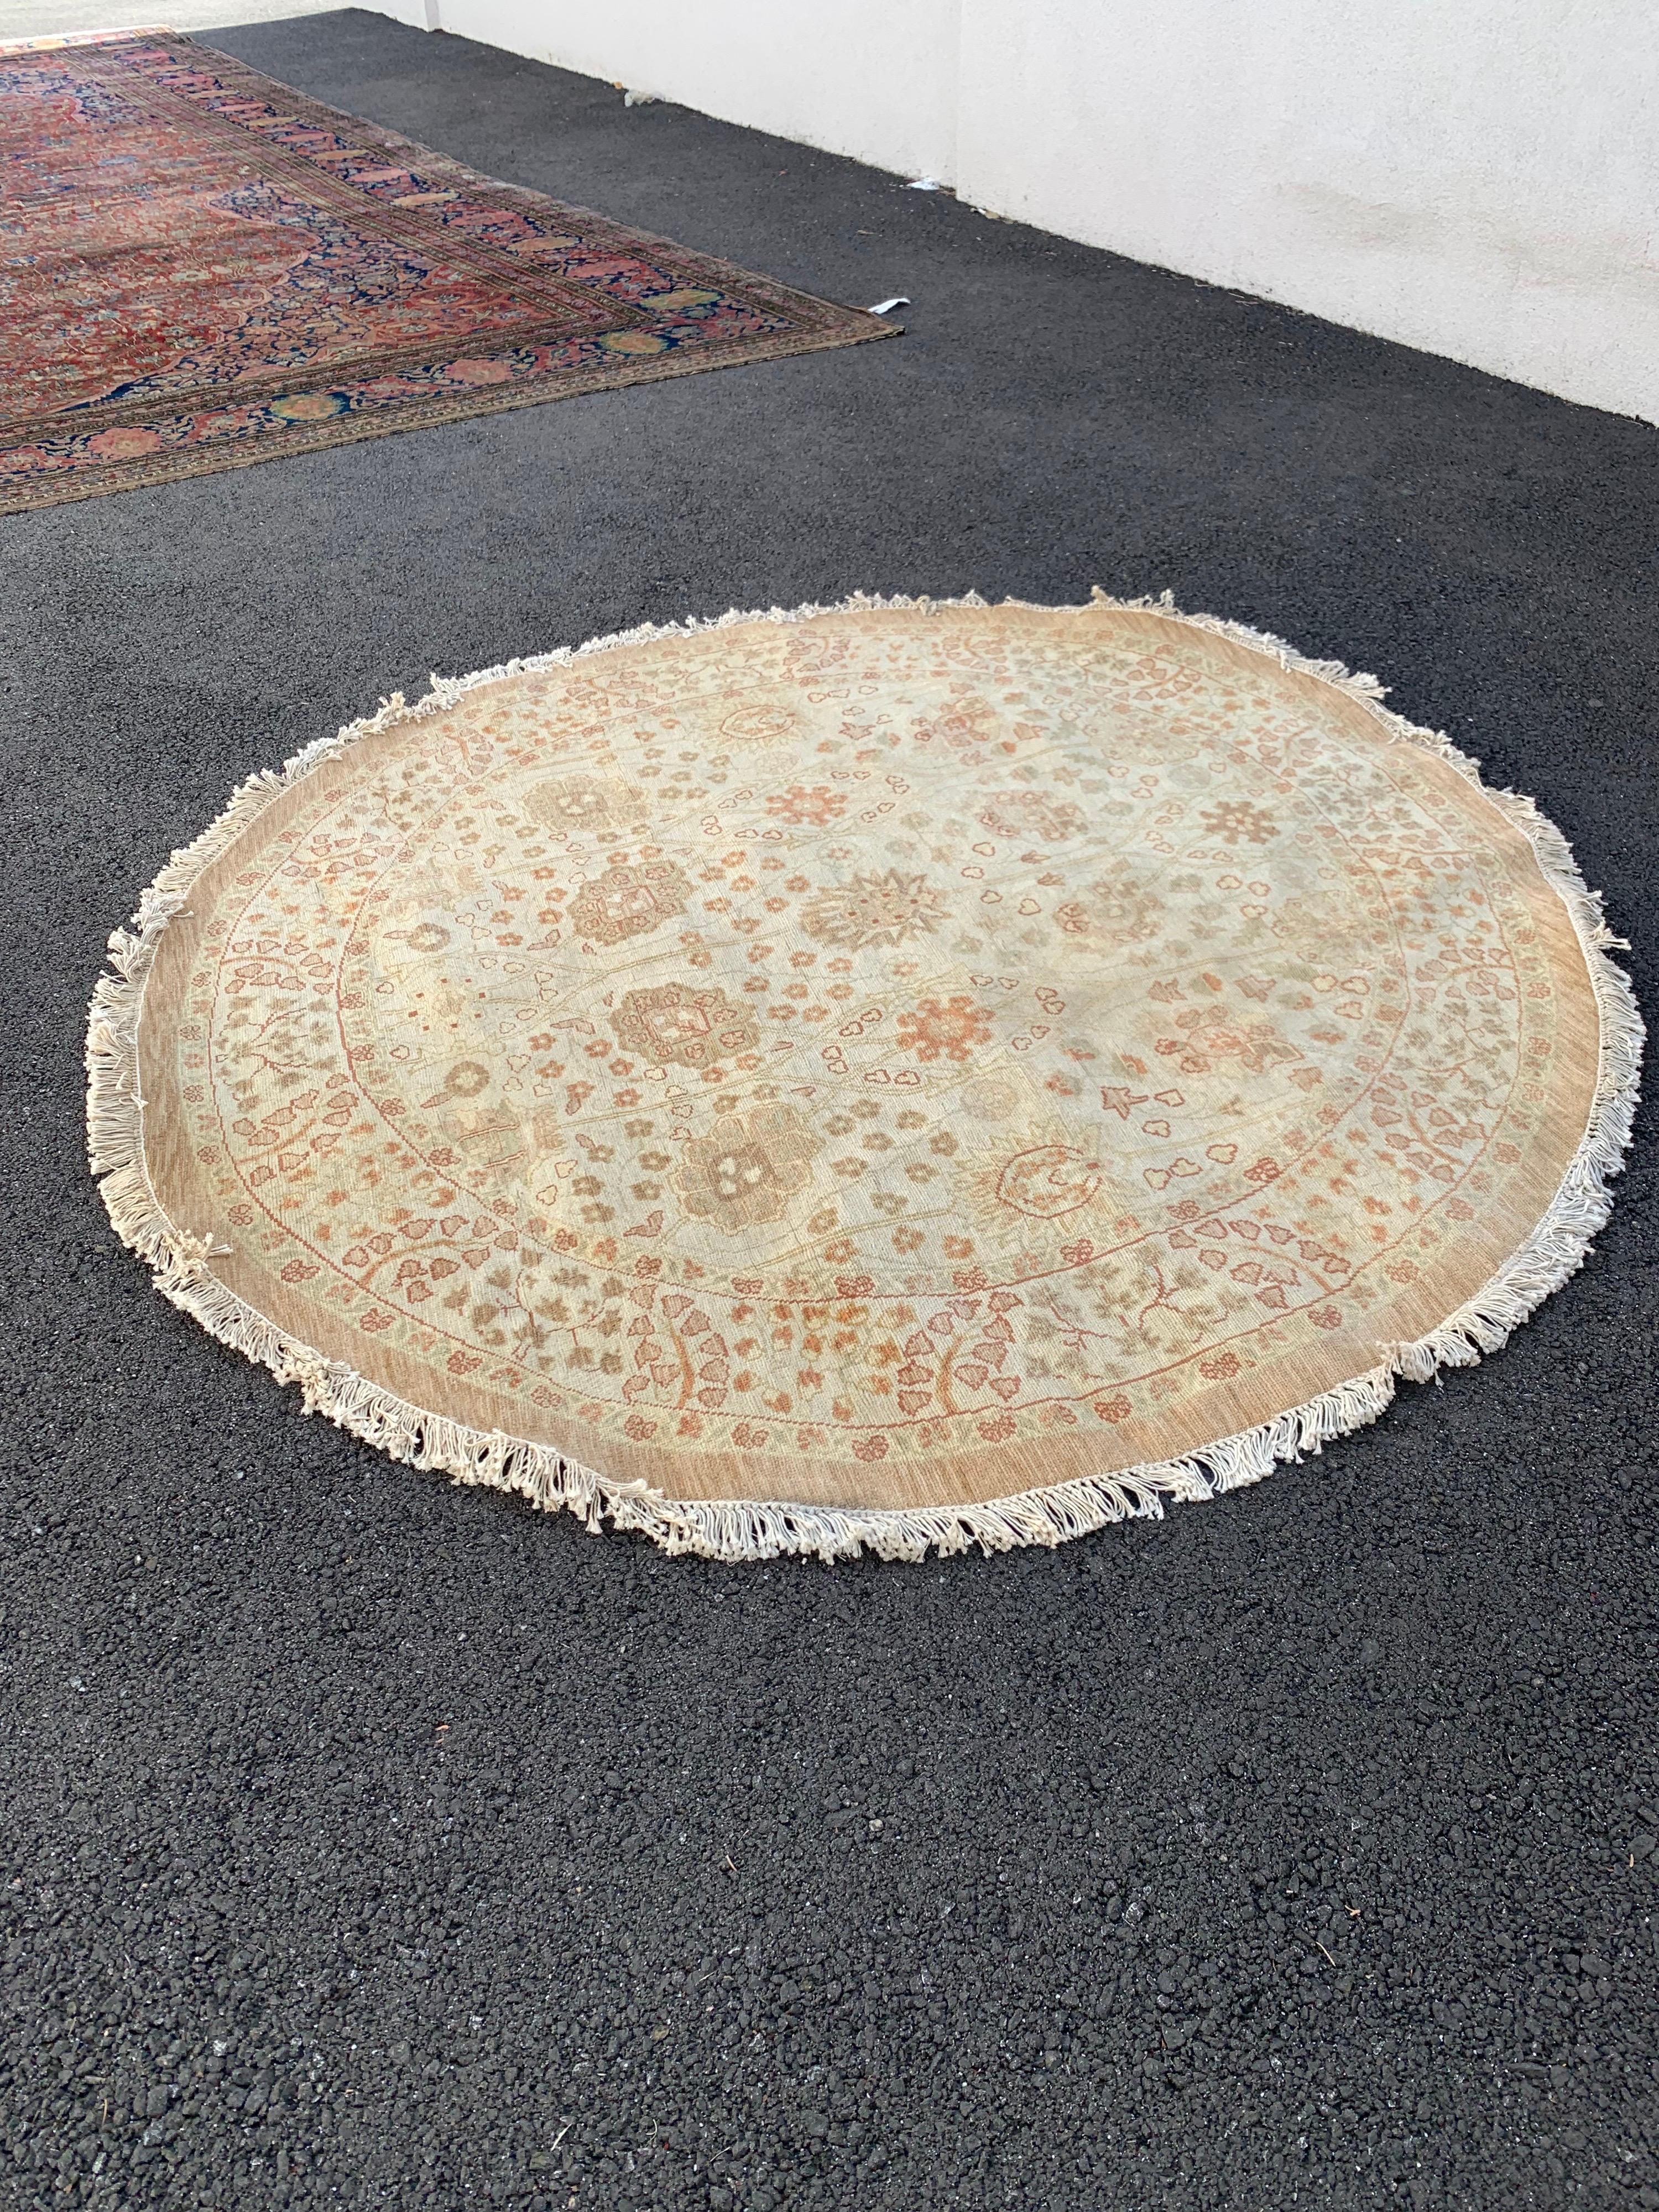 This is a new rug in Persian design handwoven in Alexandria, Egypt in the 1990s. We manufactured these rugs and the design and colors were hand chosen by us and we have a wide variety of sizes in this style. This one measures 5.2 ft in diameter with